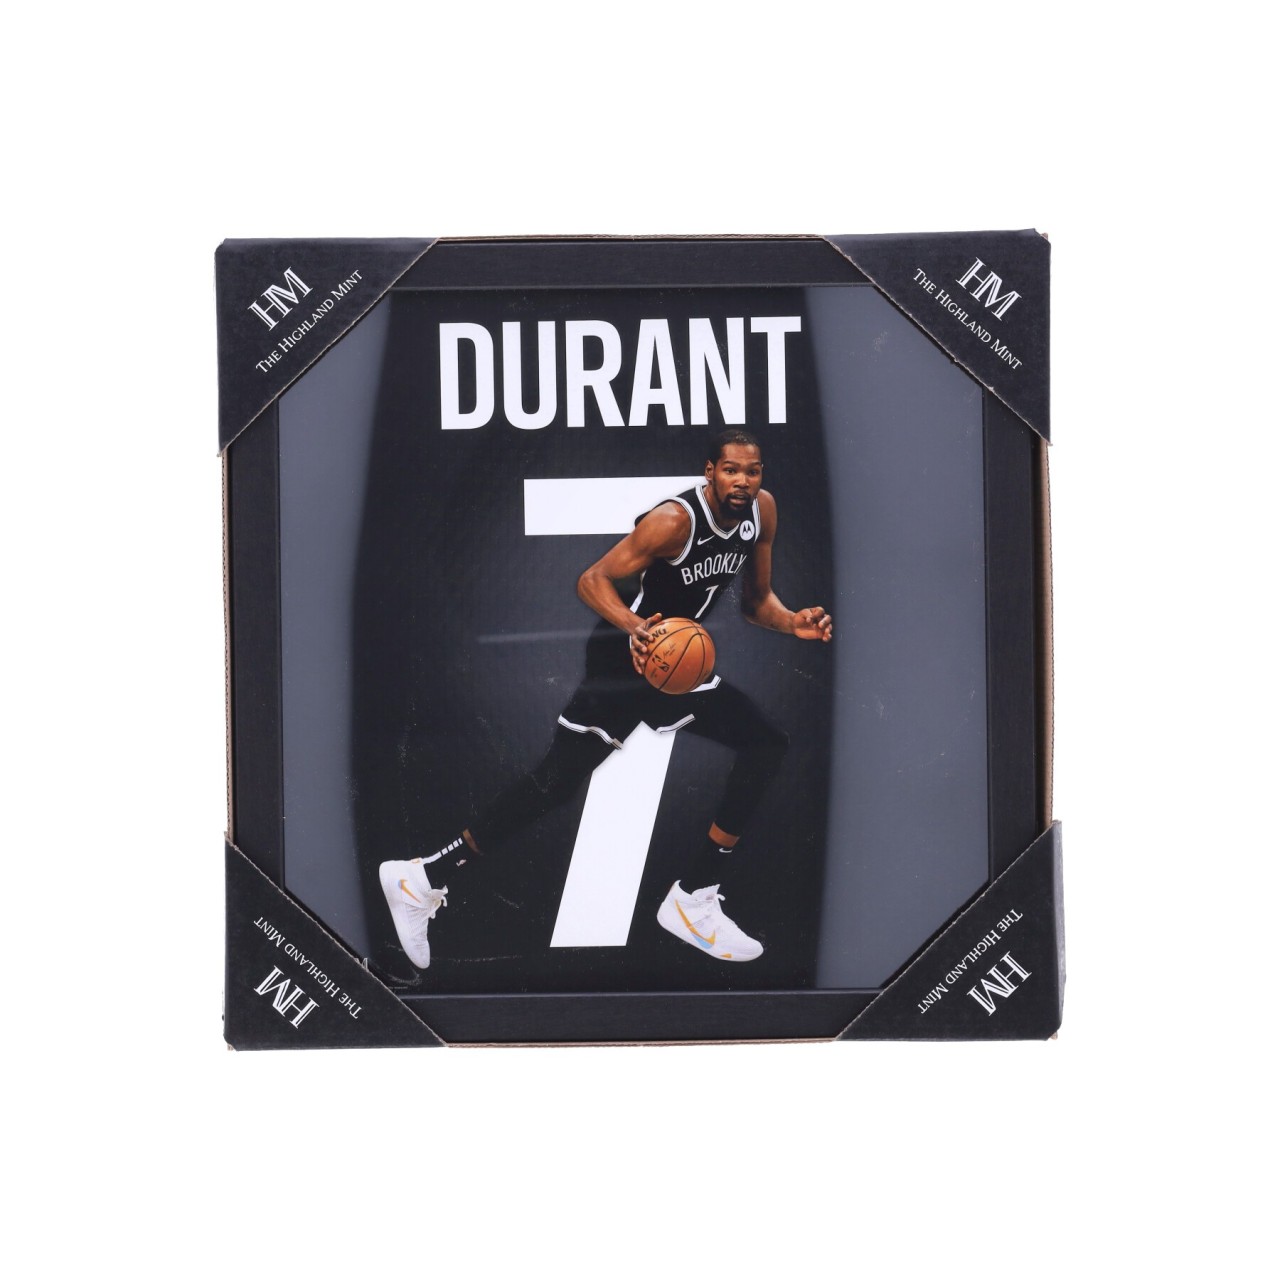 THE HIGHLAND MINT NBA NO 7 KEVIN DURANT IMPACT JERSEY FRAME BRONET PHOTO15083K